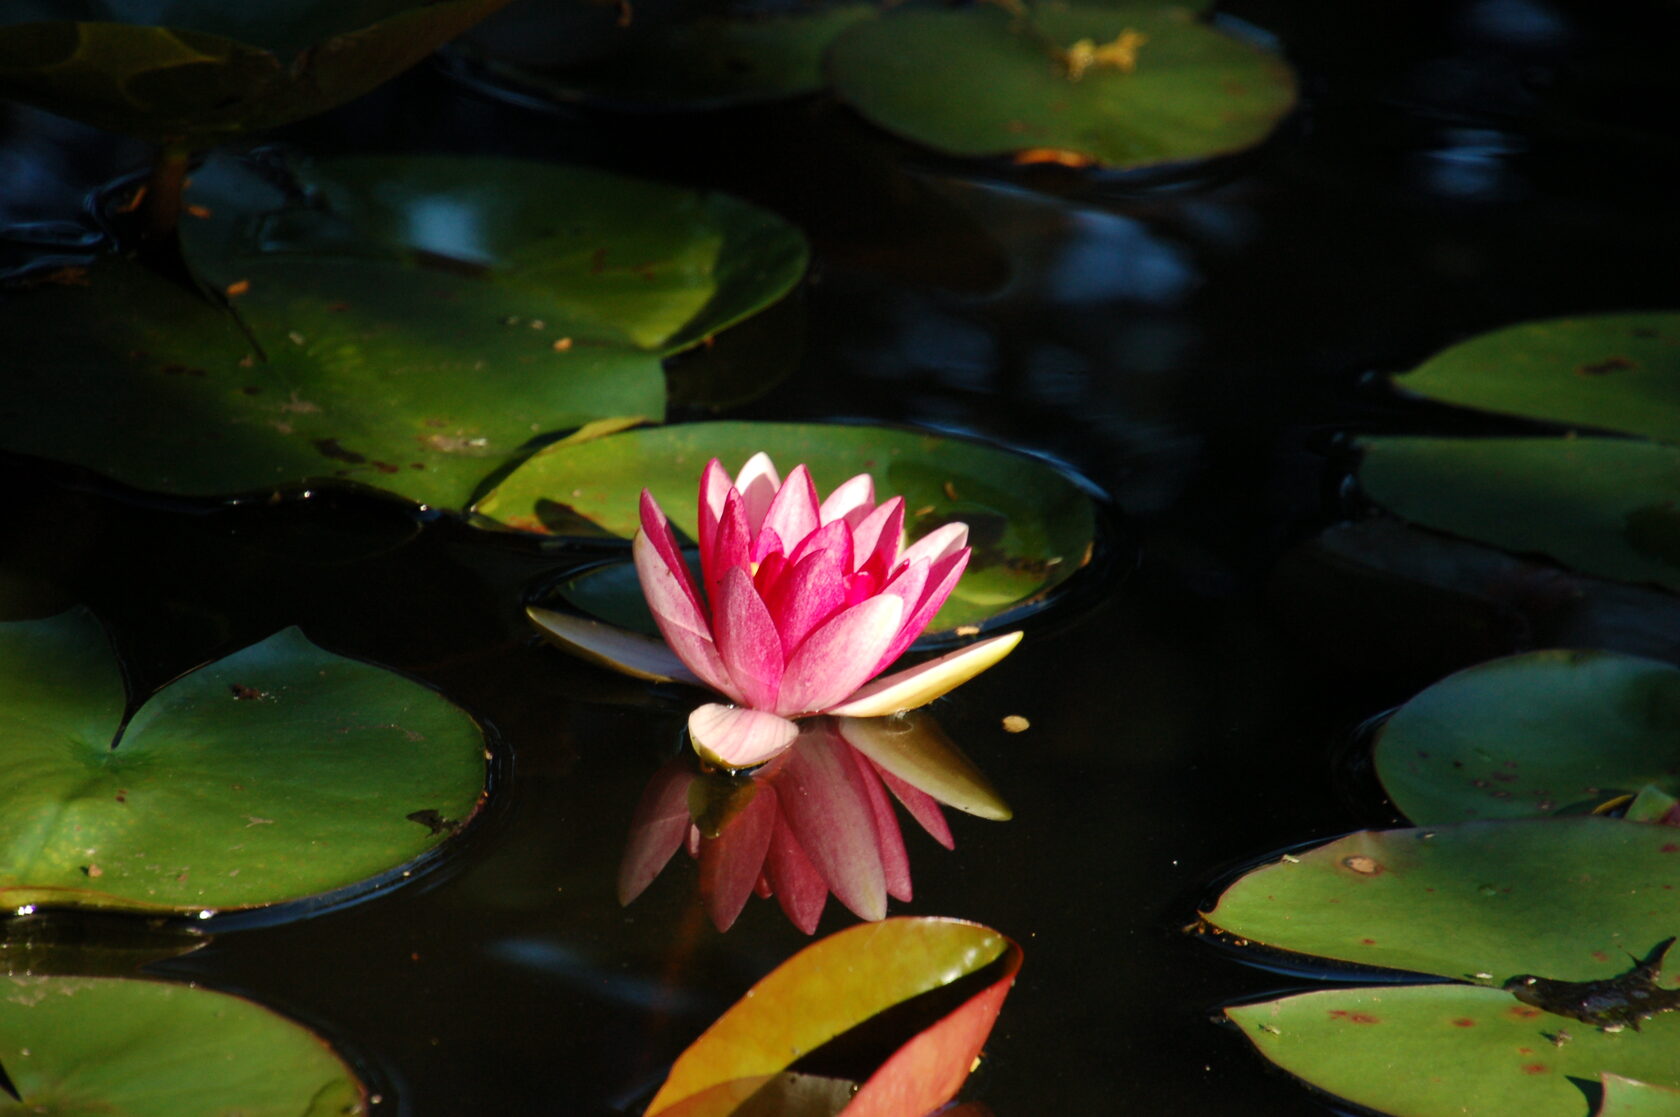 Water lilies with one lily flower in full bloom.